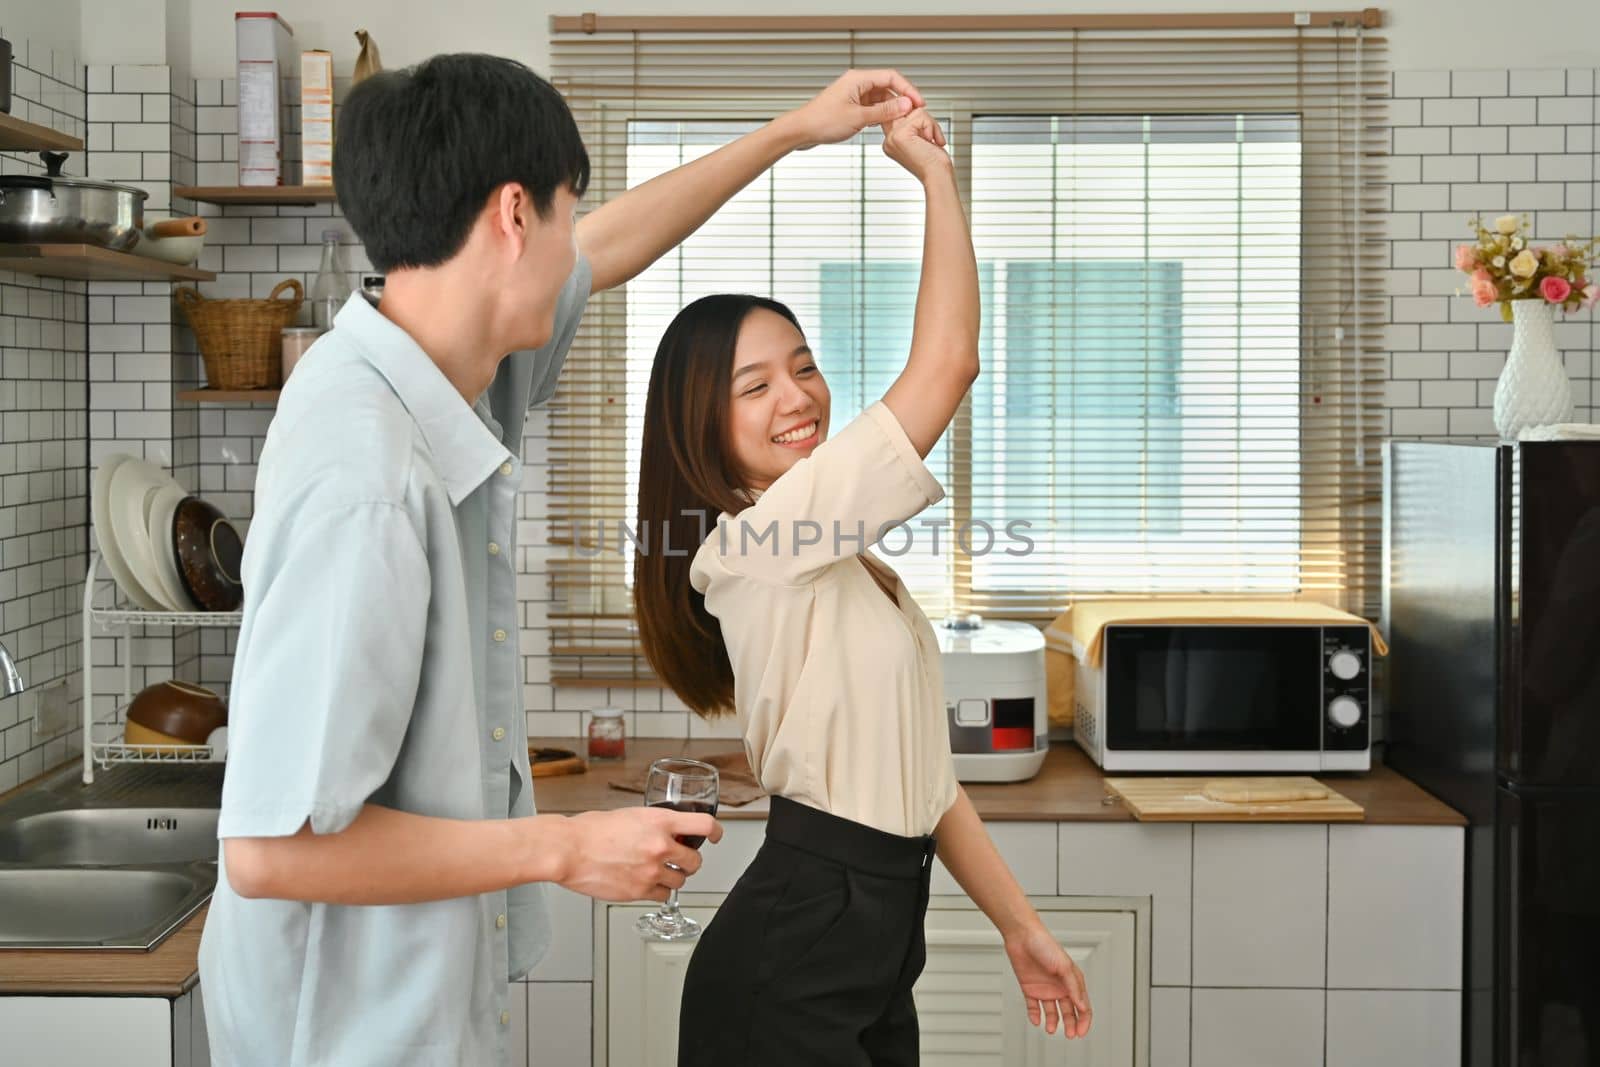 Cheerful young husband and wife dancing and have fun together in kitchen, spending leisure weekend time together at home by prathanchorruangsak